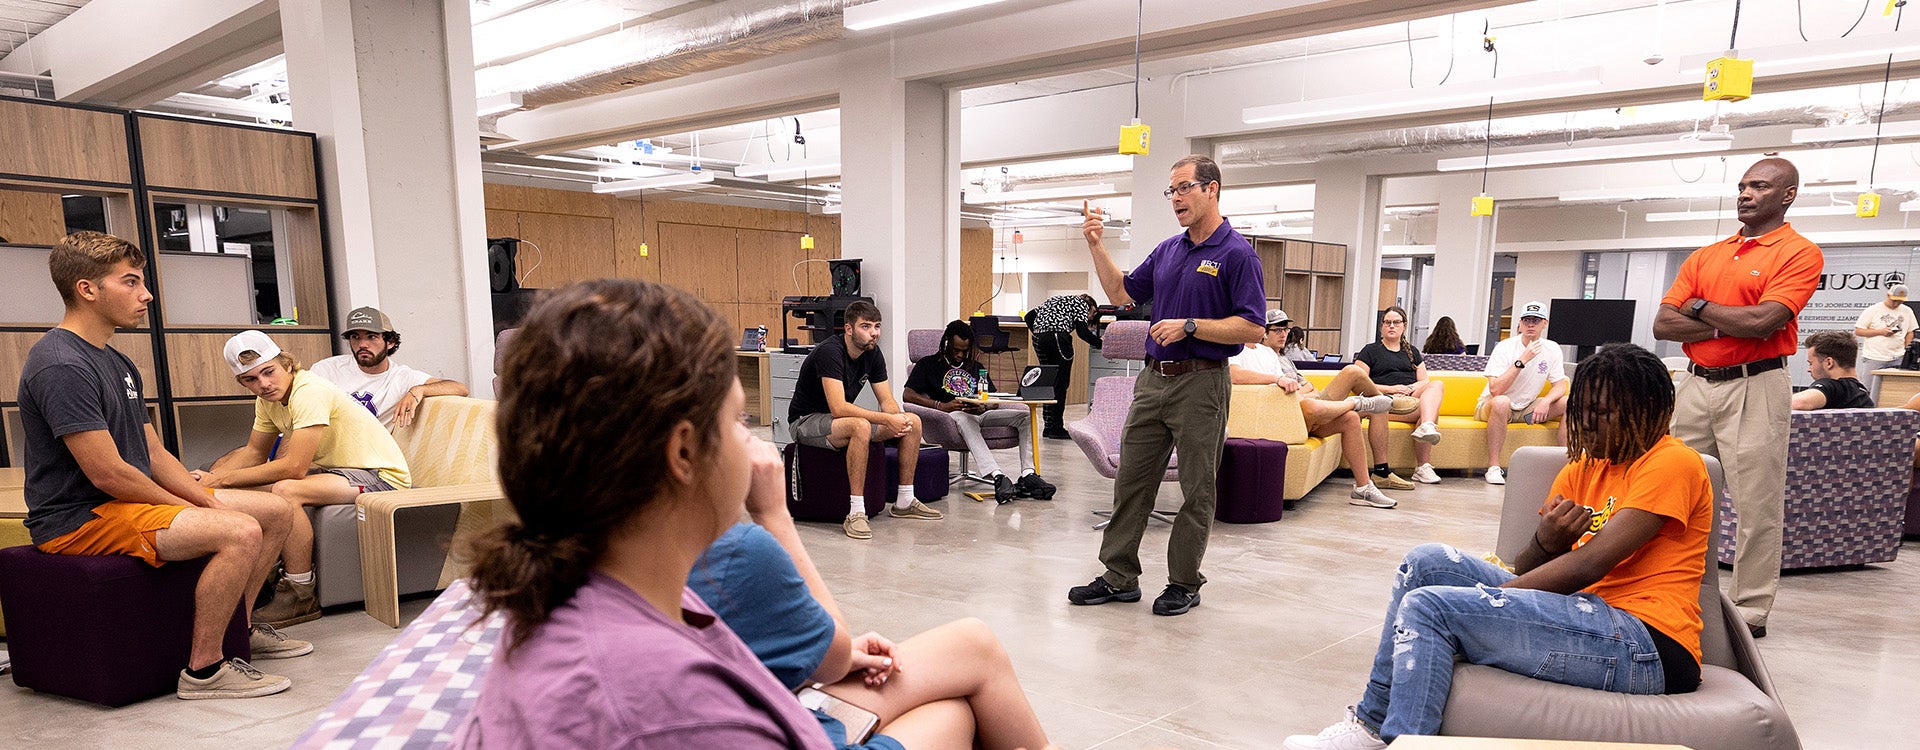 Josh Pitzer, director of lab operations for the College of Engineering and Technology, gives a tour at the Isley Innovation Hub. Pitzer, who helped set up equipment and train student workers at the hub, received a 2022 Treasured Pirate Award. (Photo by Rhett Butler)